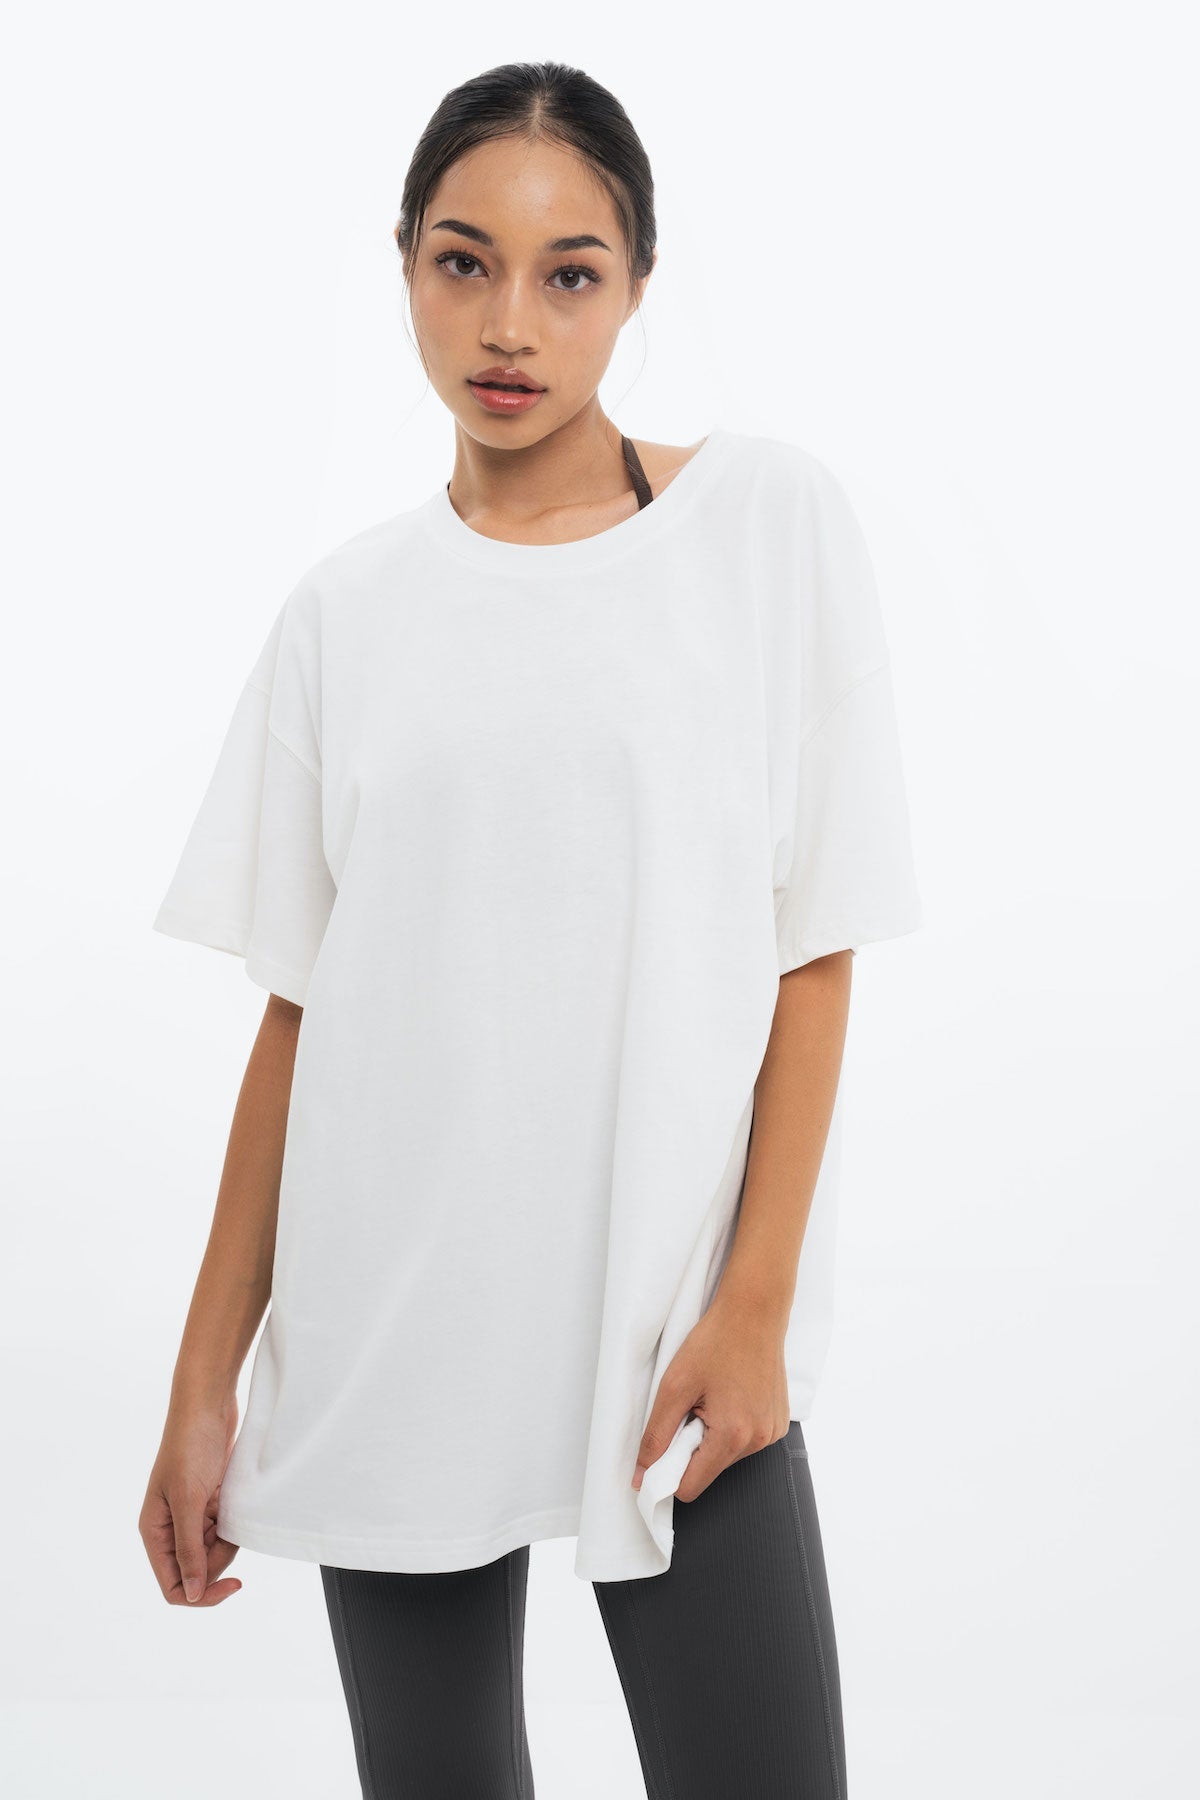 Flap T-Shirt in White